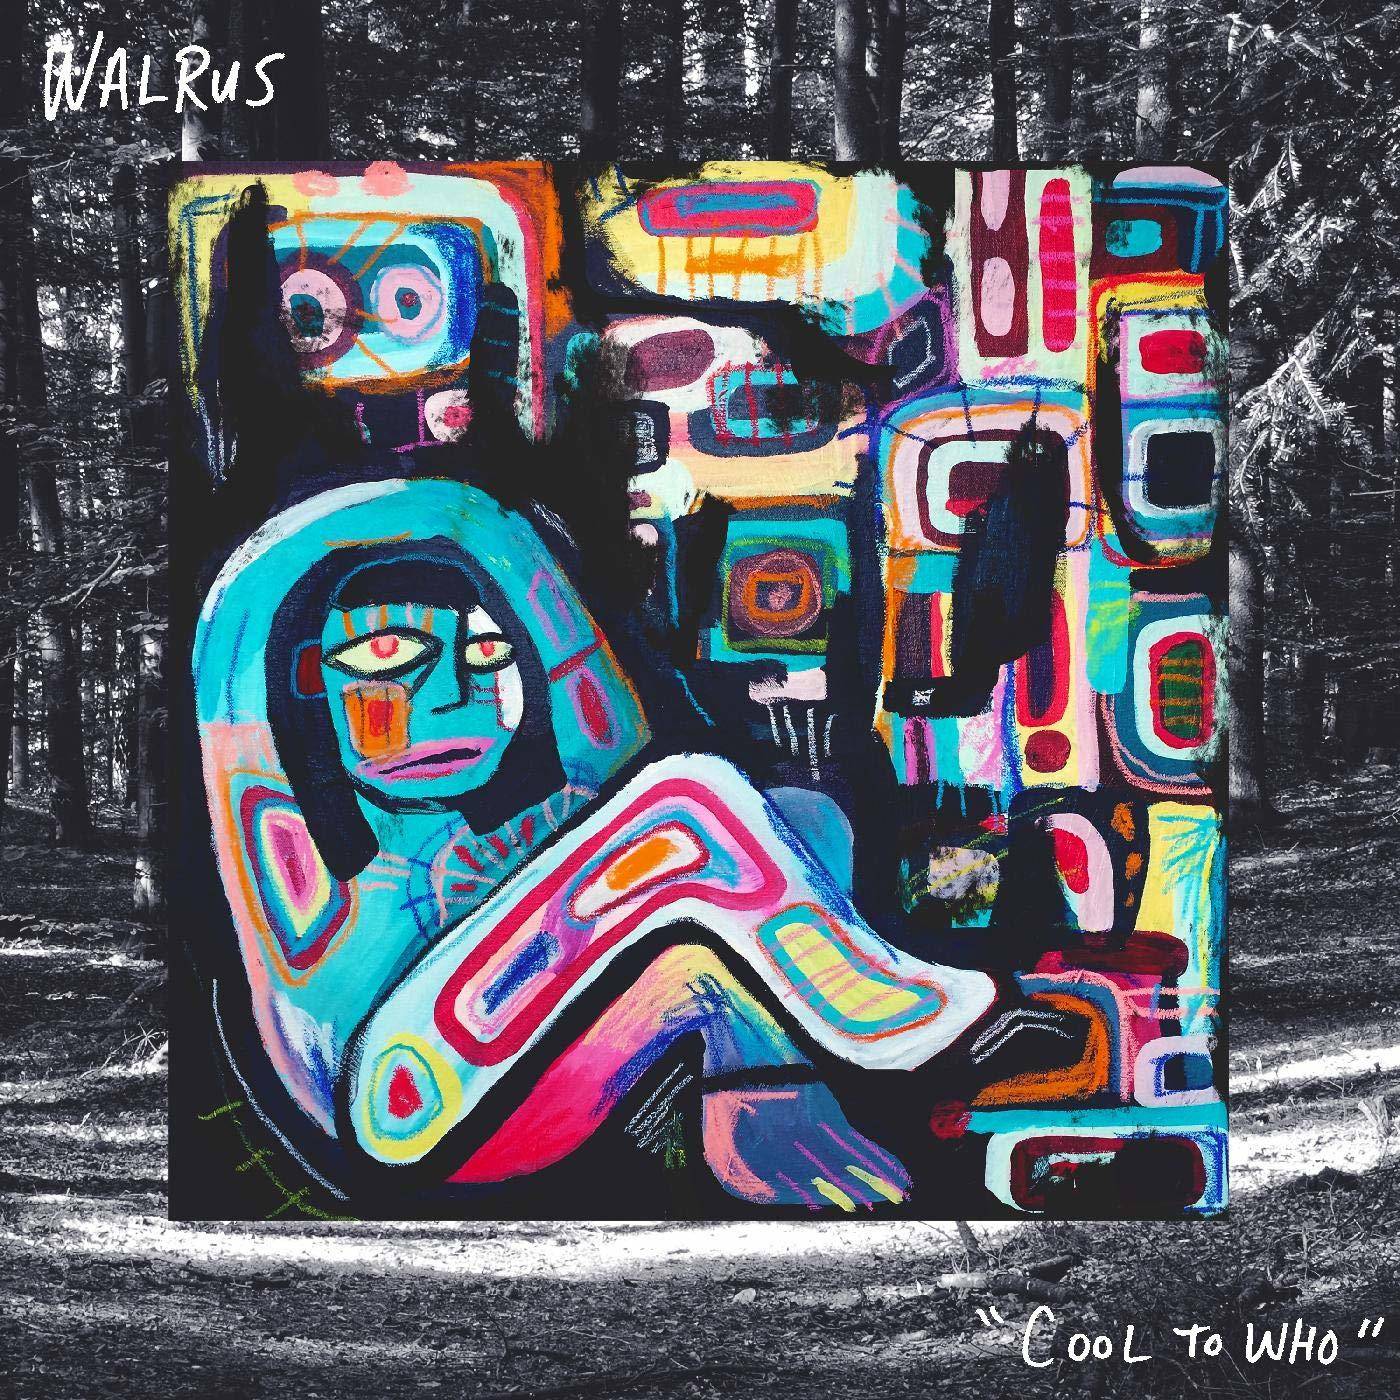 TO - - Walrus (Vinyl) WHO COOL